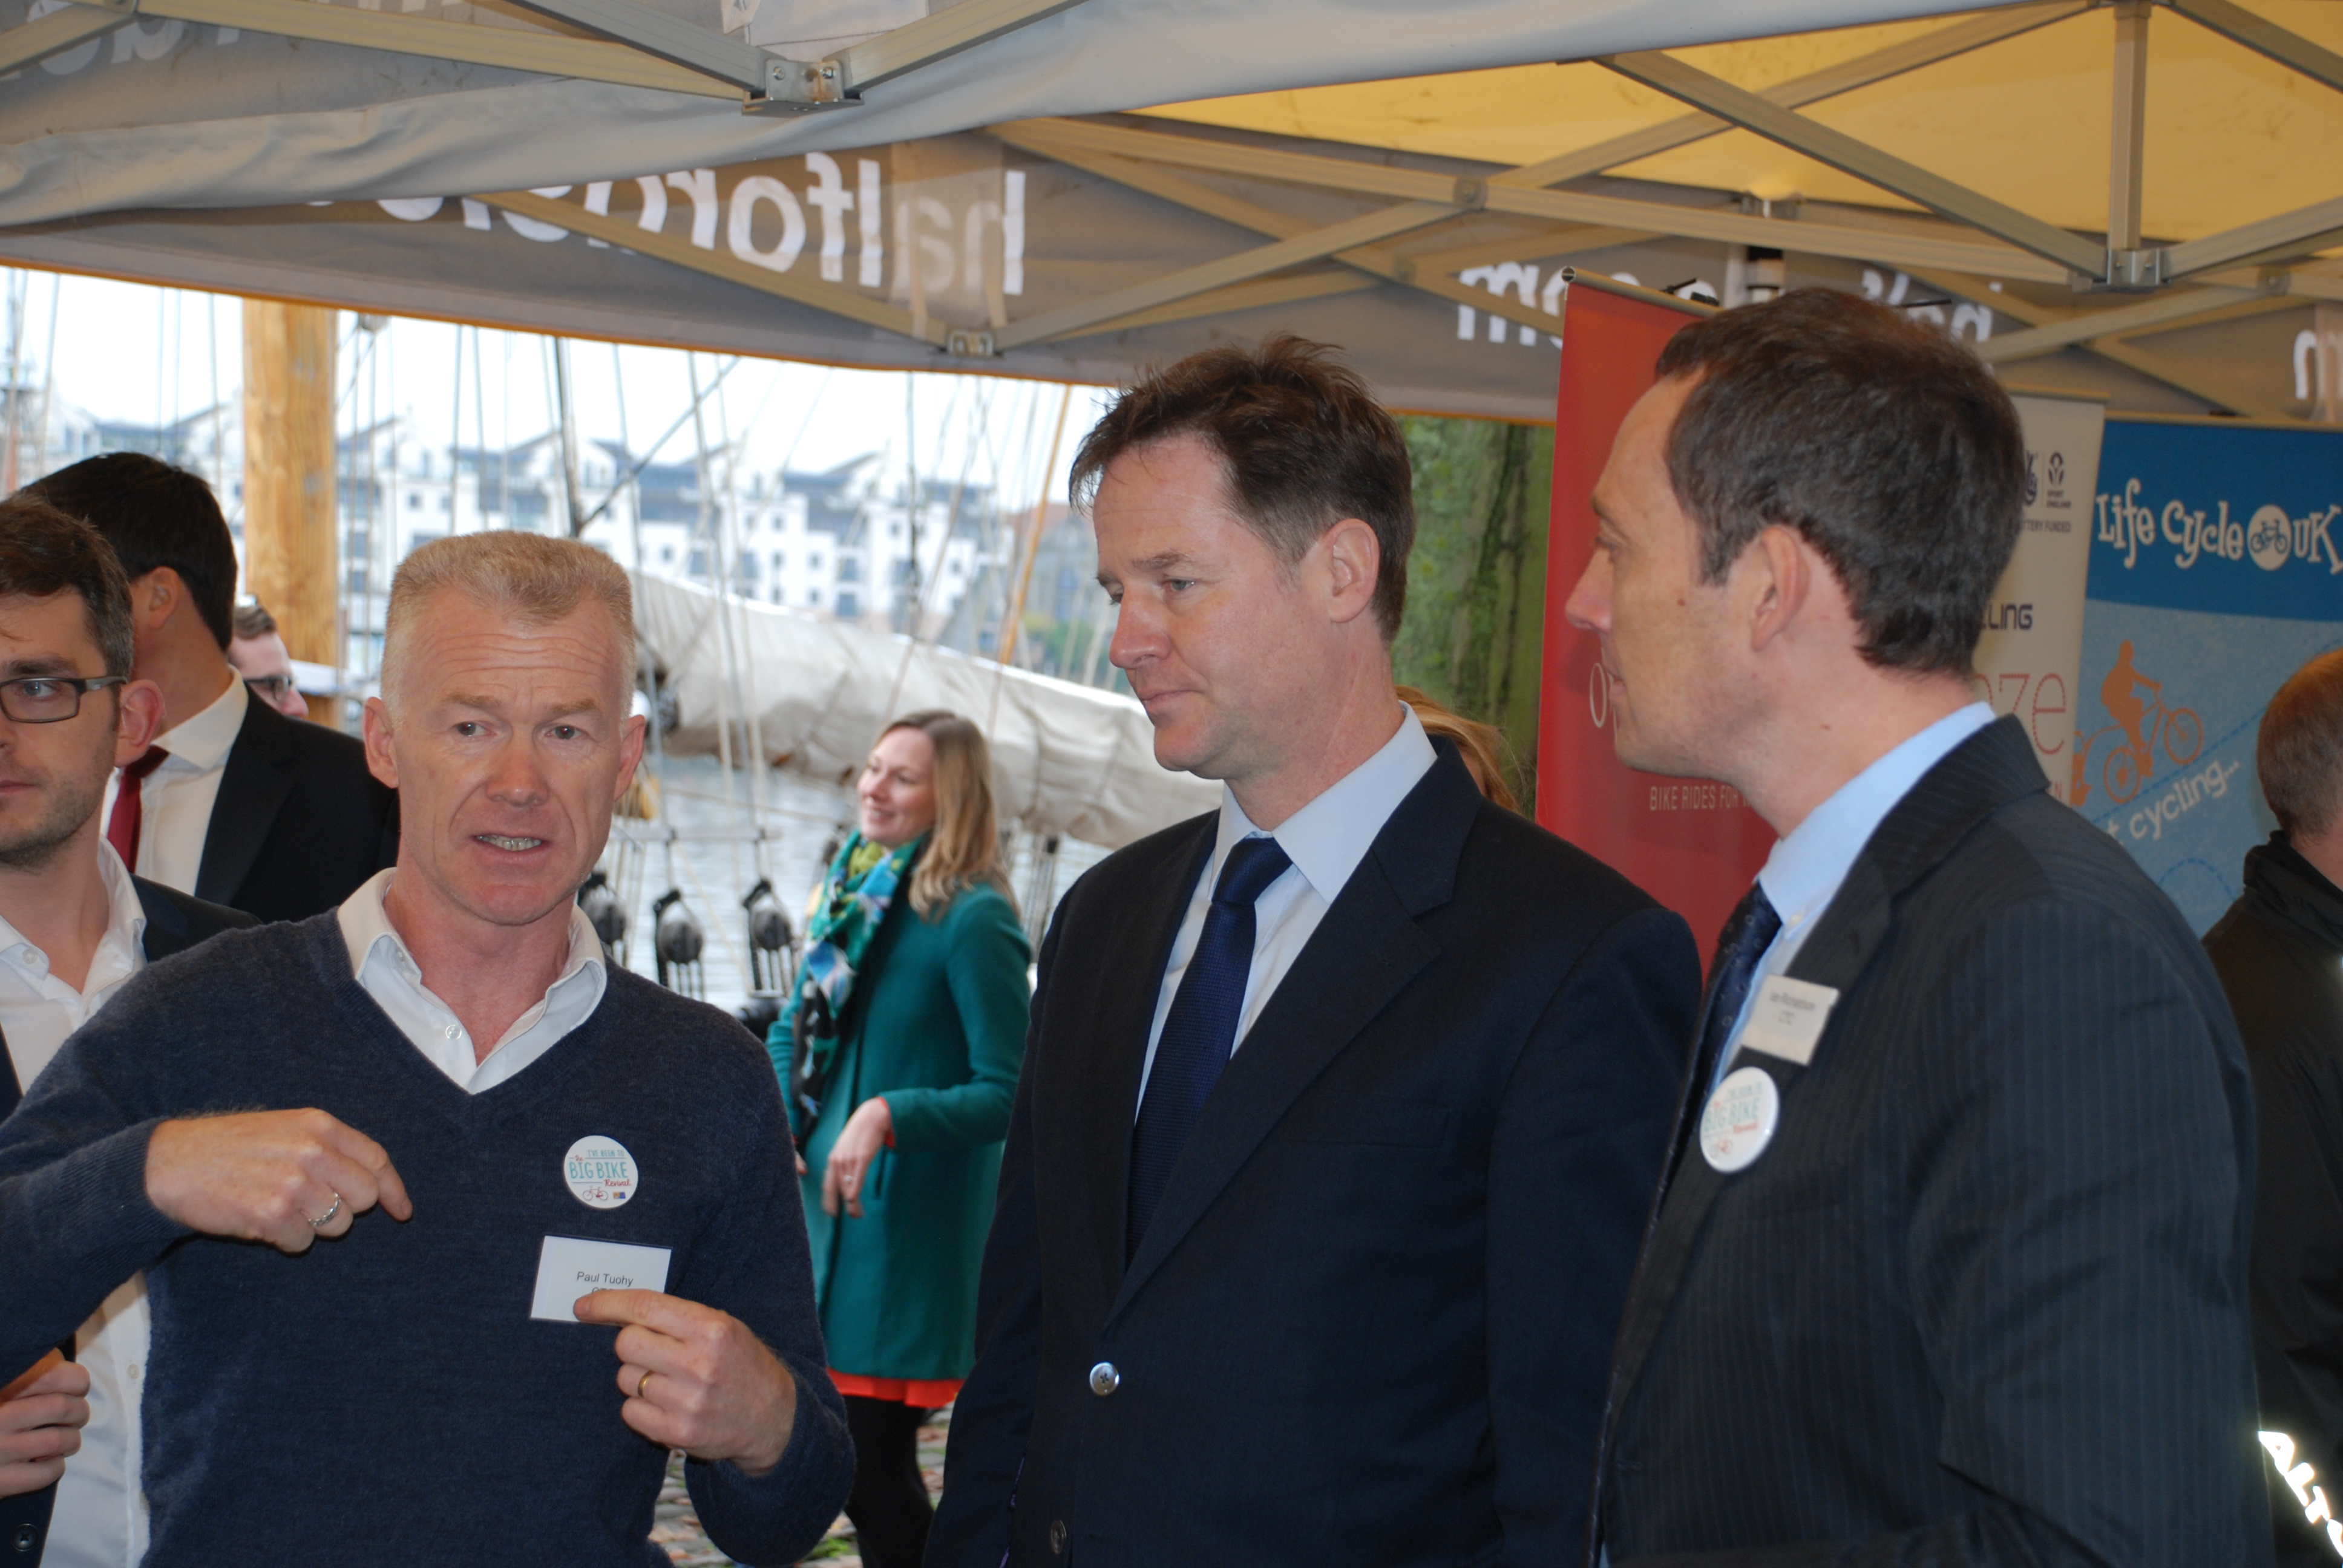 Paul Tuohy talking to Nick Clegg